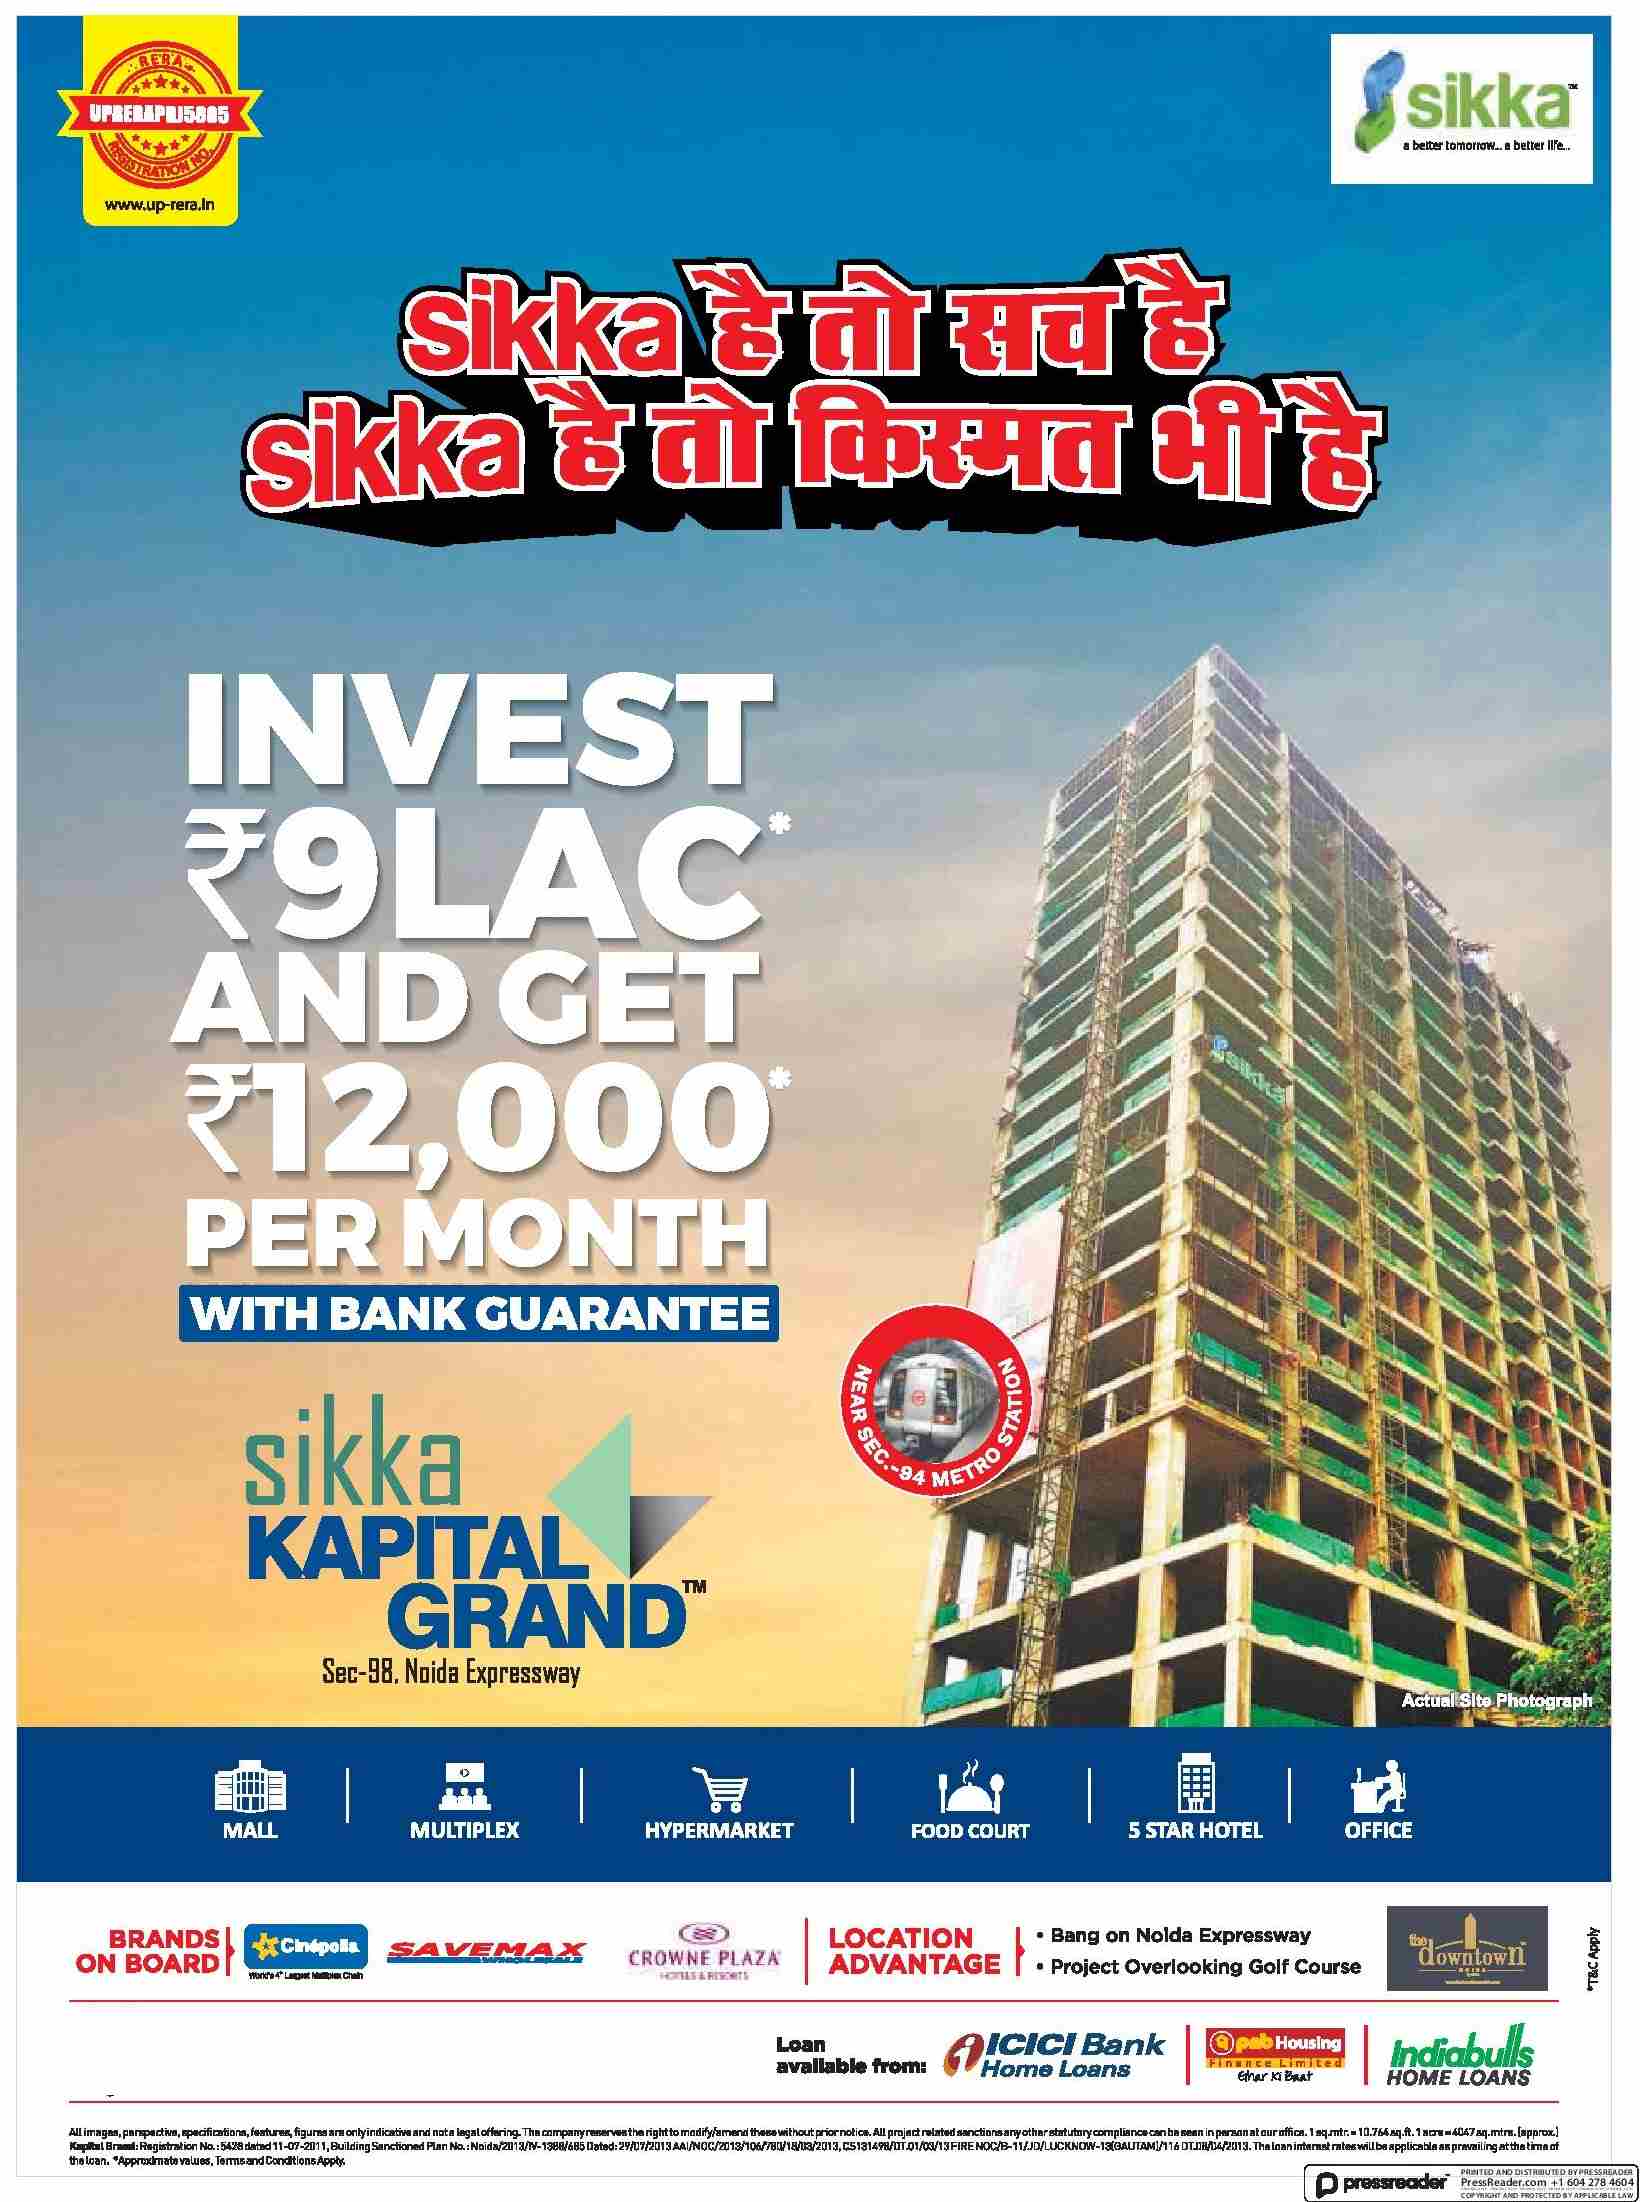 Invest Rs. 9 Lac & get Rs. 12000 per month at Sikka The Downtown Kapital Grand in Noida